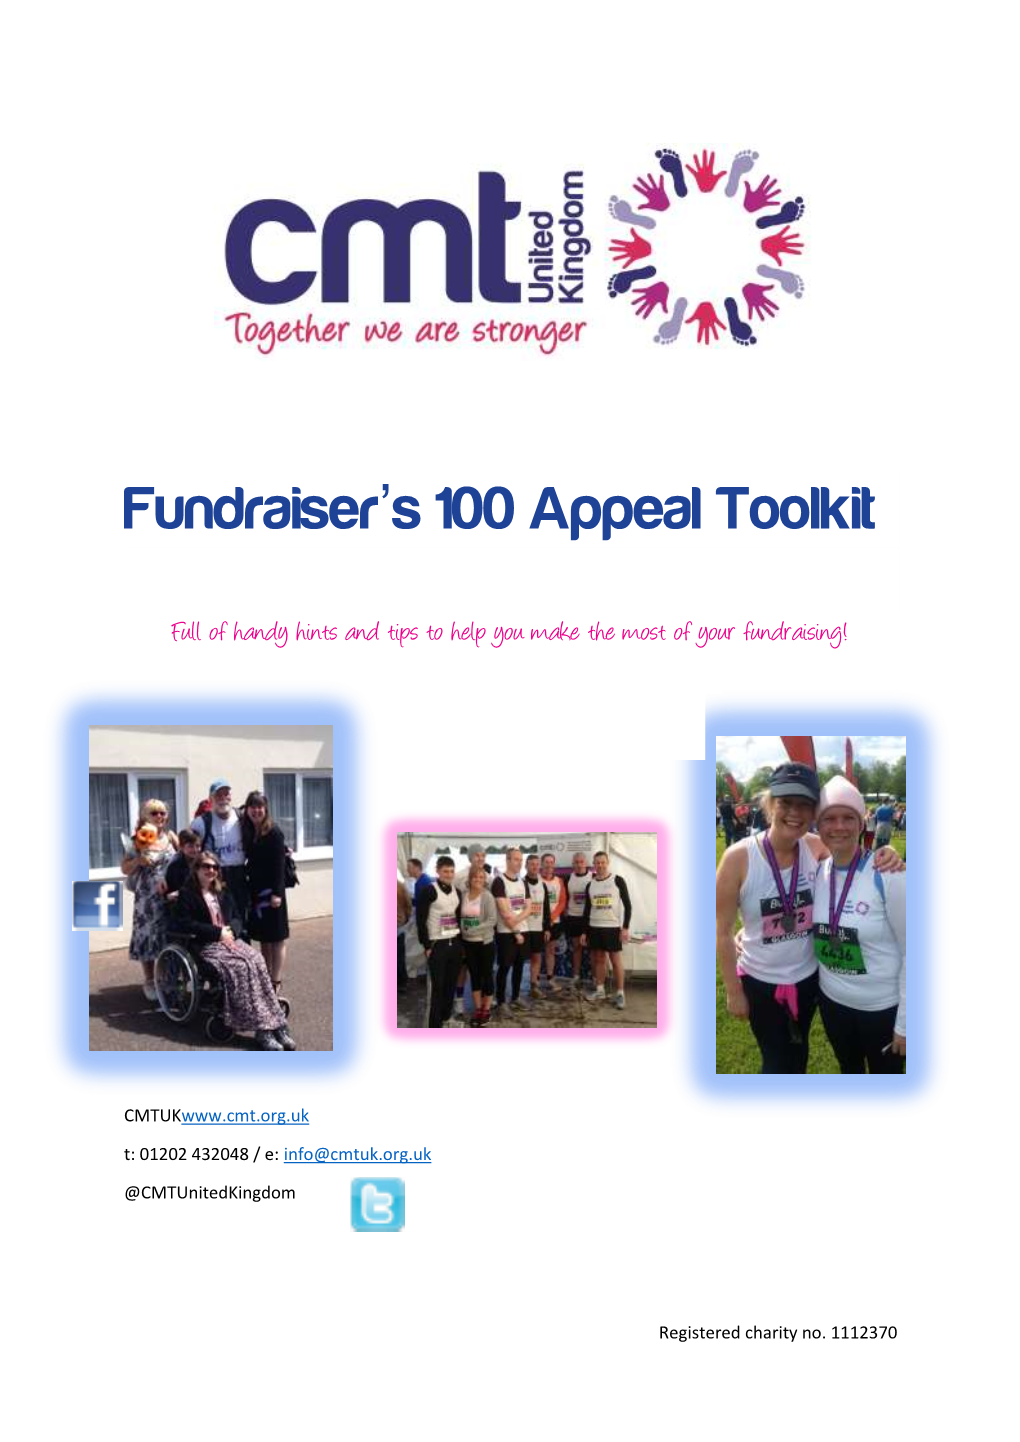 Fundraiser's 100 Appeal Toolkit